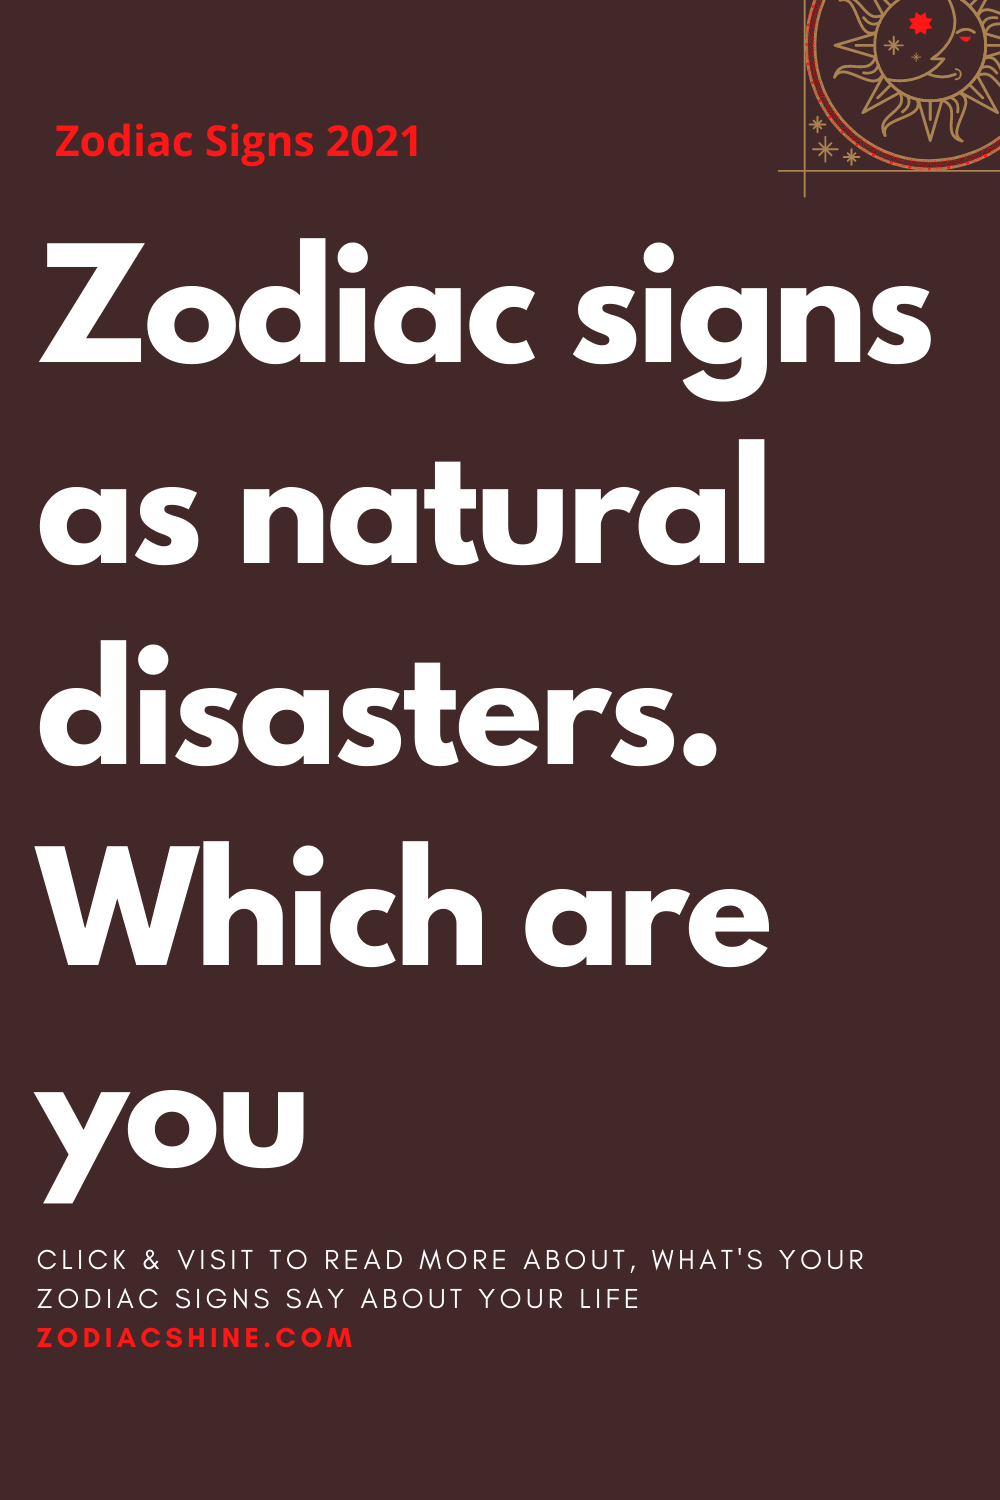 Zodiac signs as natural disasters. Which are you